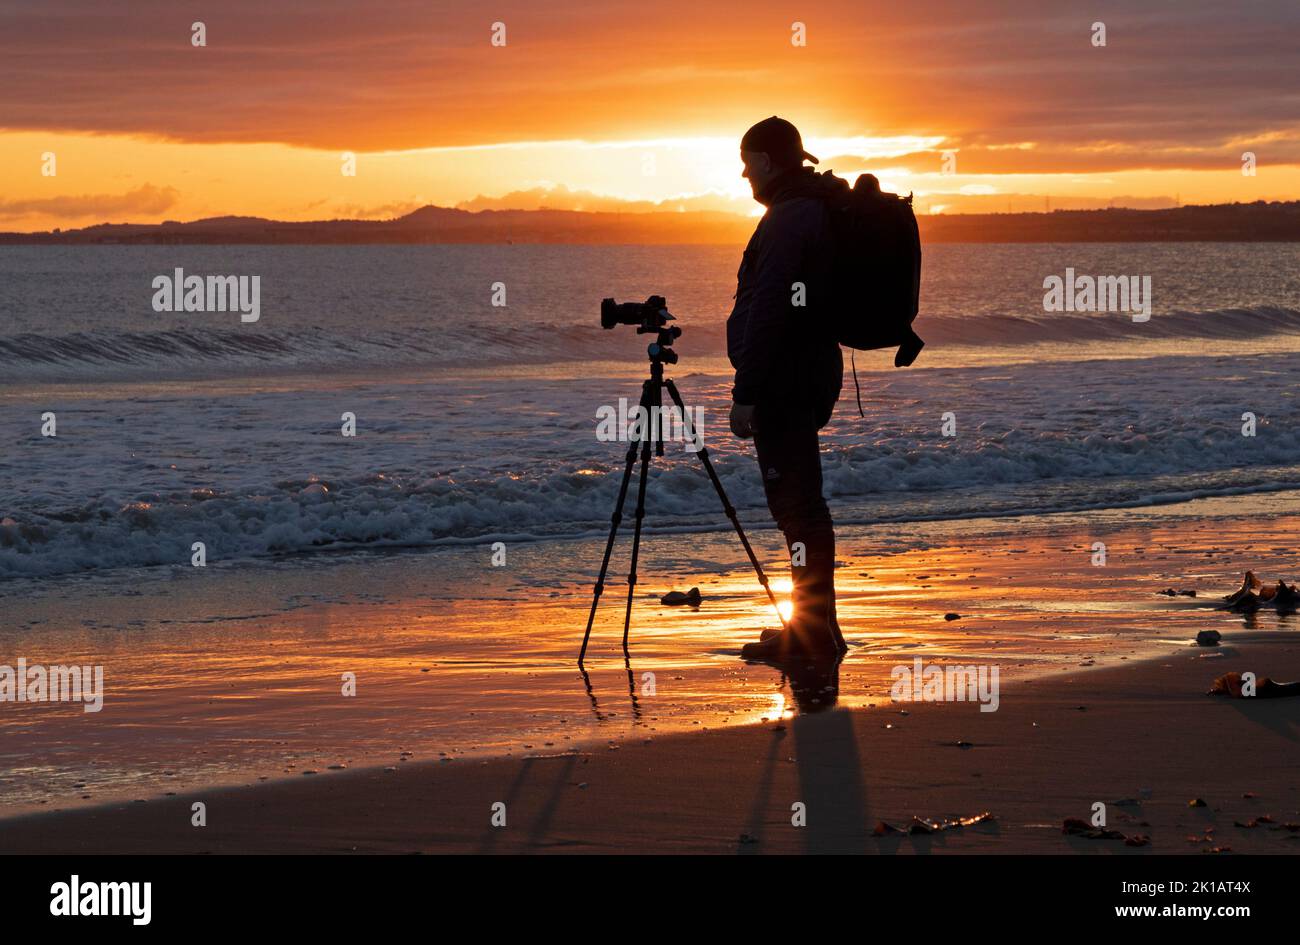 Portobello, Edinburgh, Scotland, UK. 17th September 2022.  Cold snap chilly autumnal sunrise at the seaside for this photographer on the shore of the Firth of Forth. Temperature of 8 degrees centigrade. Credit: Arch White/alamy live news. Stock Photo